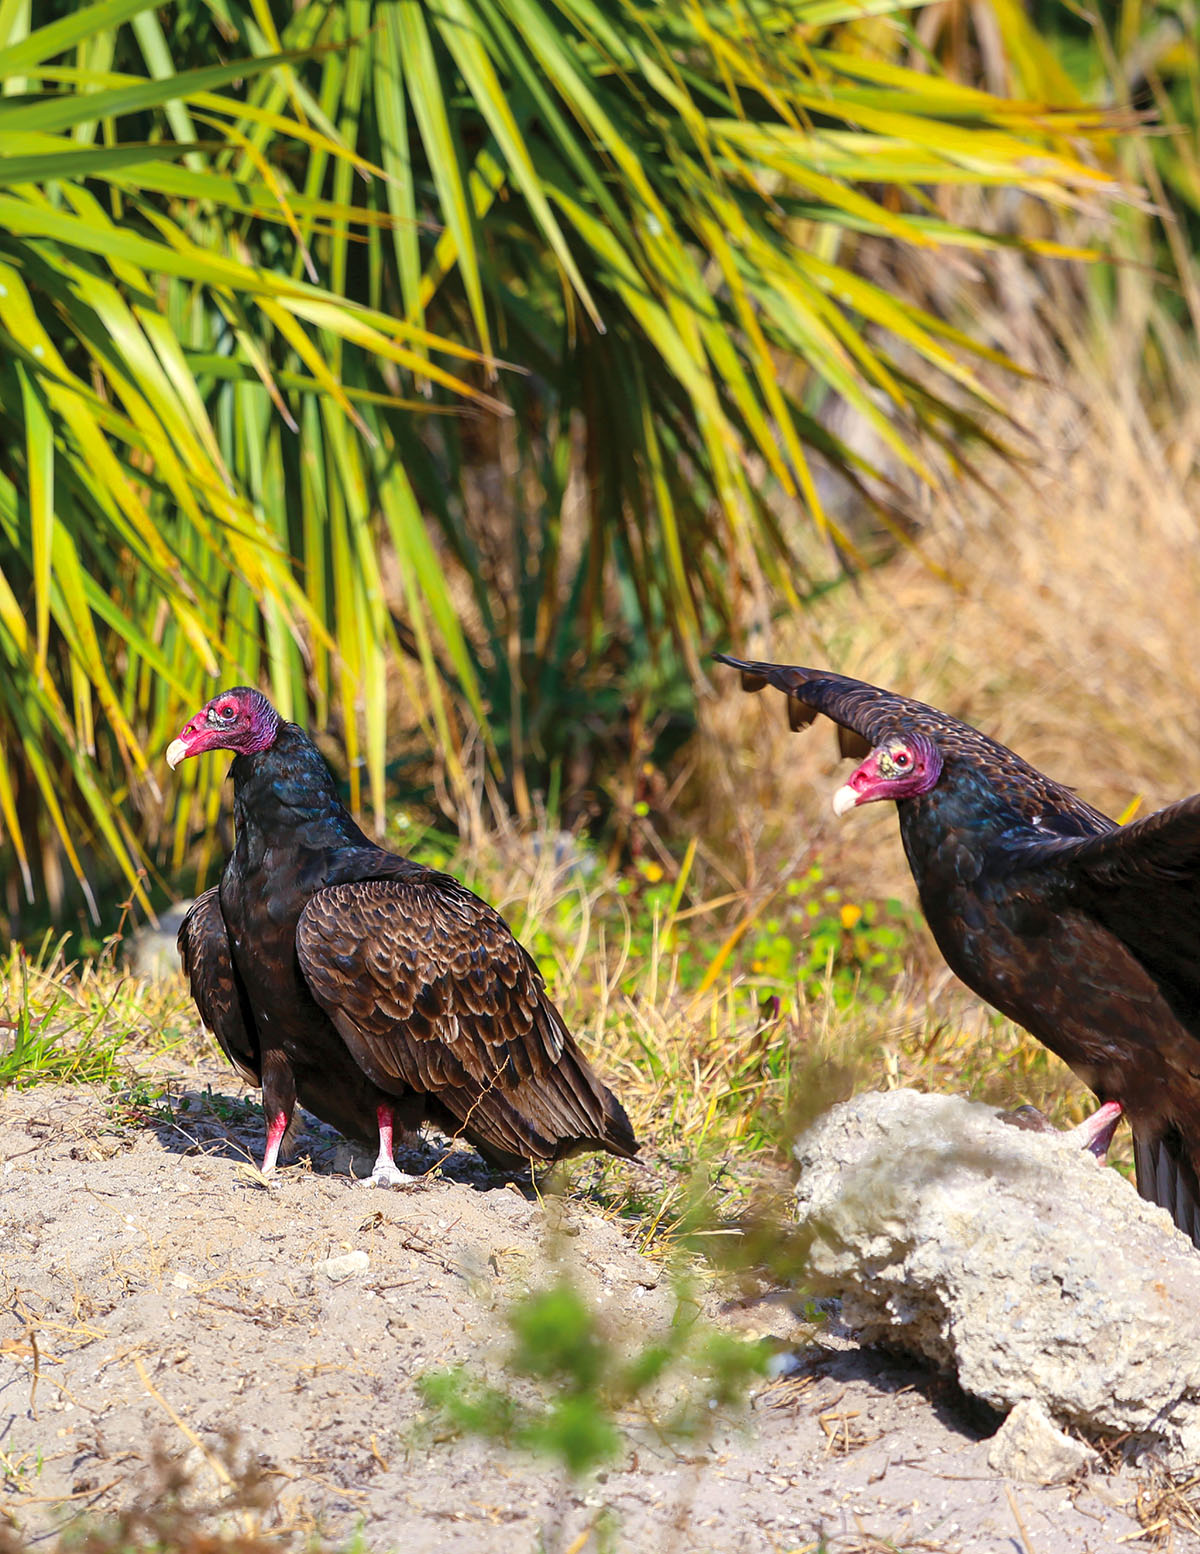 Turkey vultures enjoy the sun while patiently waiting for their turn to eat.